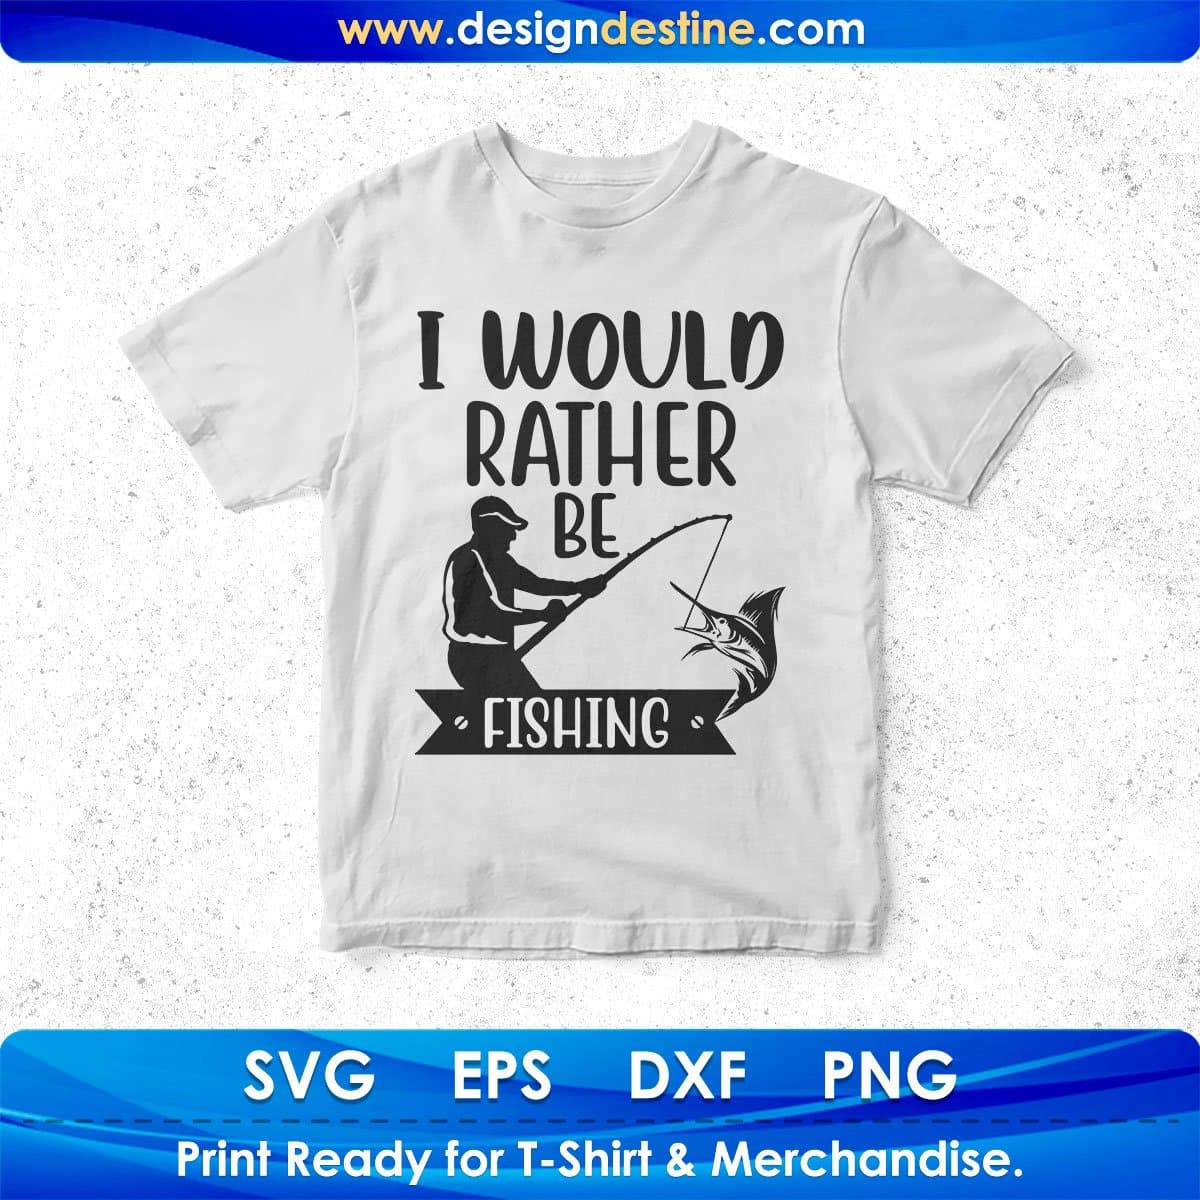 Fishing & Hunting Funny Shirt. because I'd Rather Be Outside